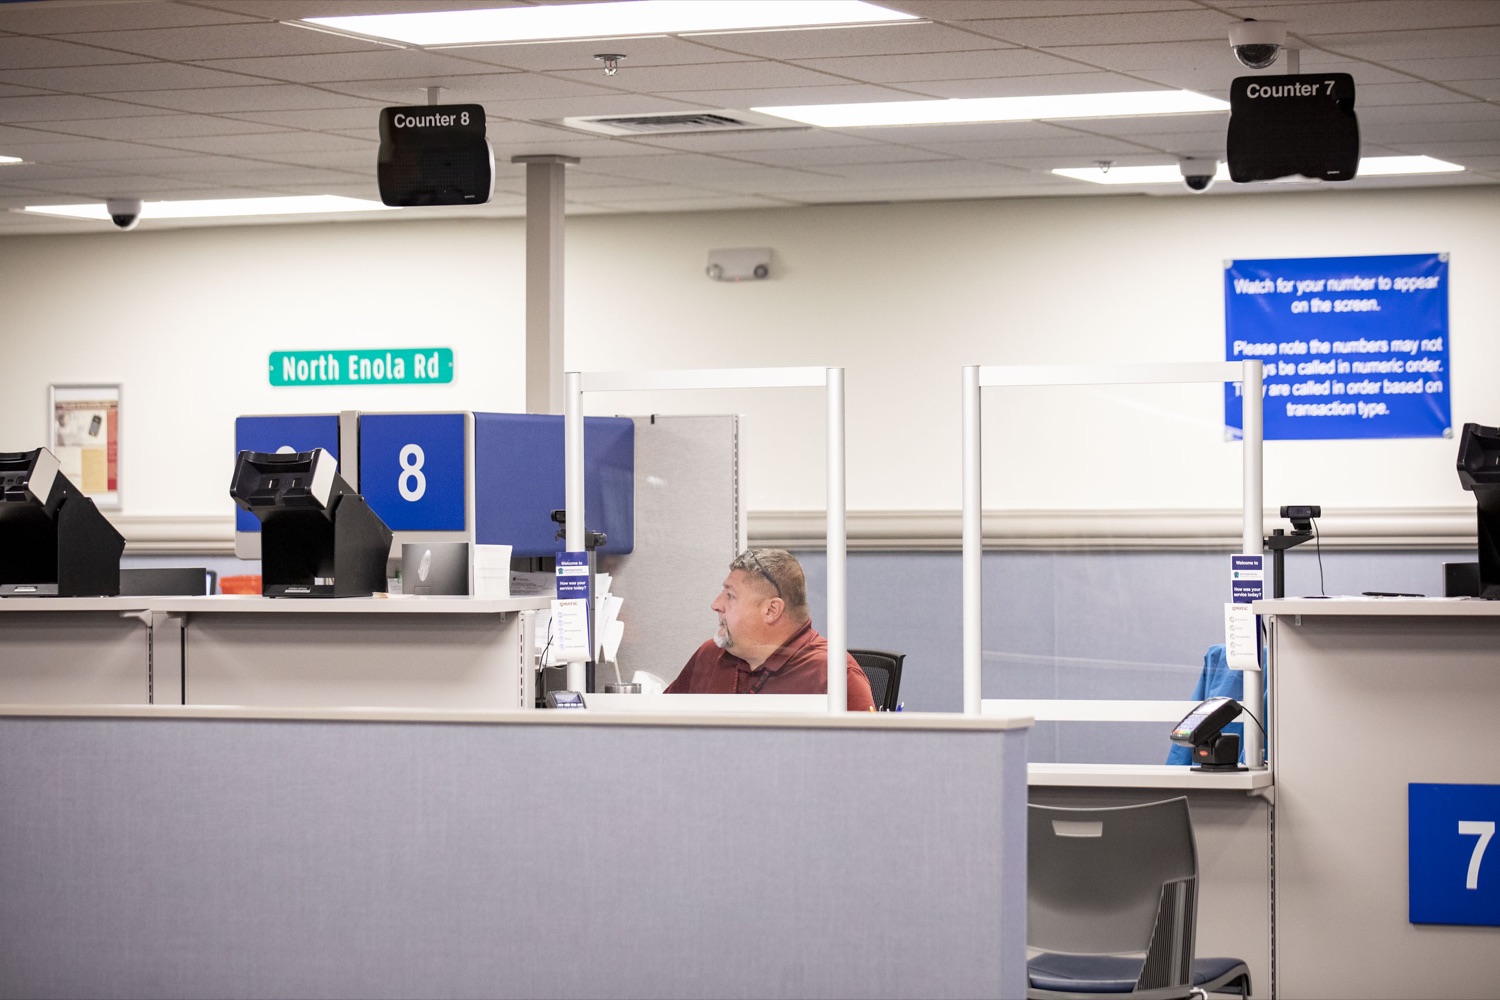 The Summerdale Driver License Center in Enola began piloting new products on September 12, 2022 and, since then, another 15 locations have started issuing the new products as part of ongoing security enhancements, in Enola, PA on September 22, 2022.<br><a href="https://filesource.amperwave.net/commonwealthofpa/photo/22223_dot_security_cz_23.jpg" target="_blank">⇣ Download Photo</a>